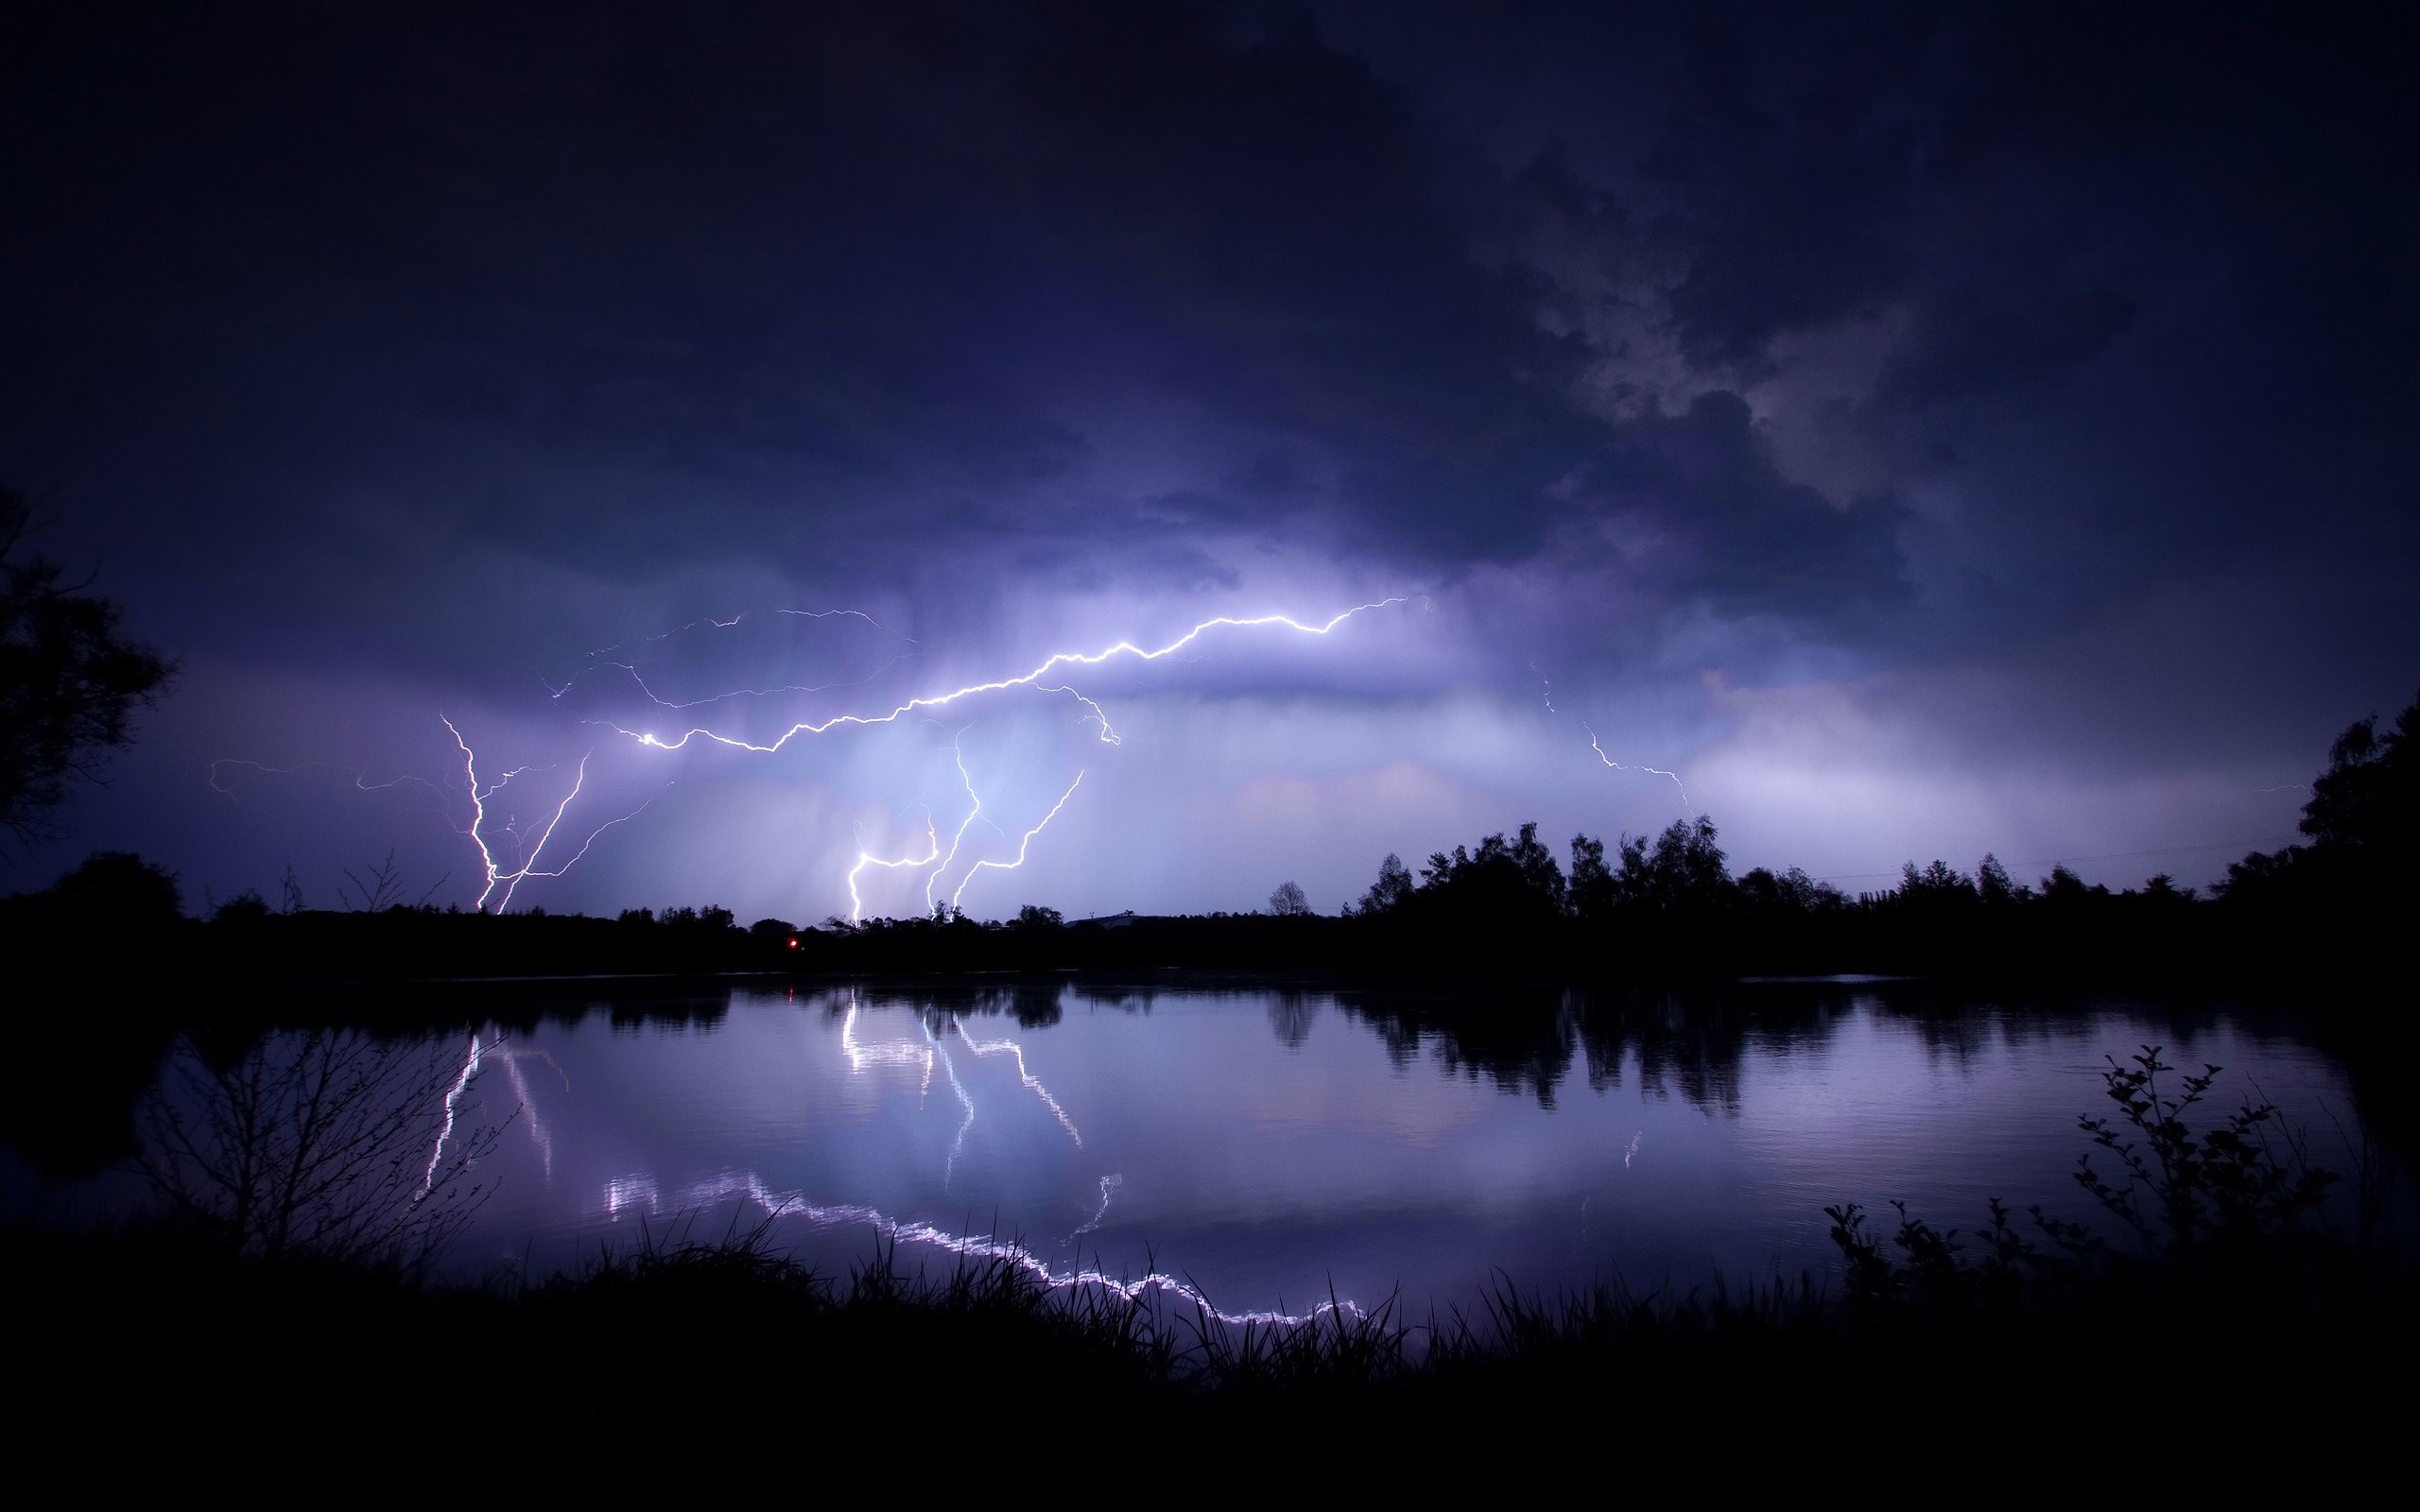 2560x1600 Storms for your Desktop Wallpaper http://www.thomascraigconsulting.